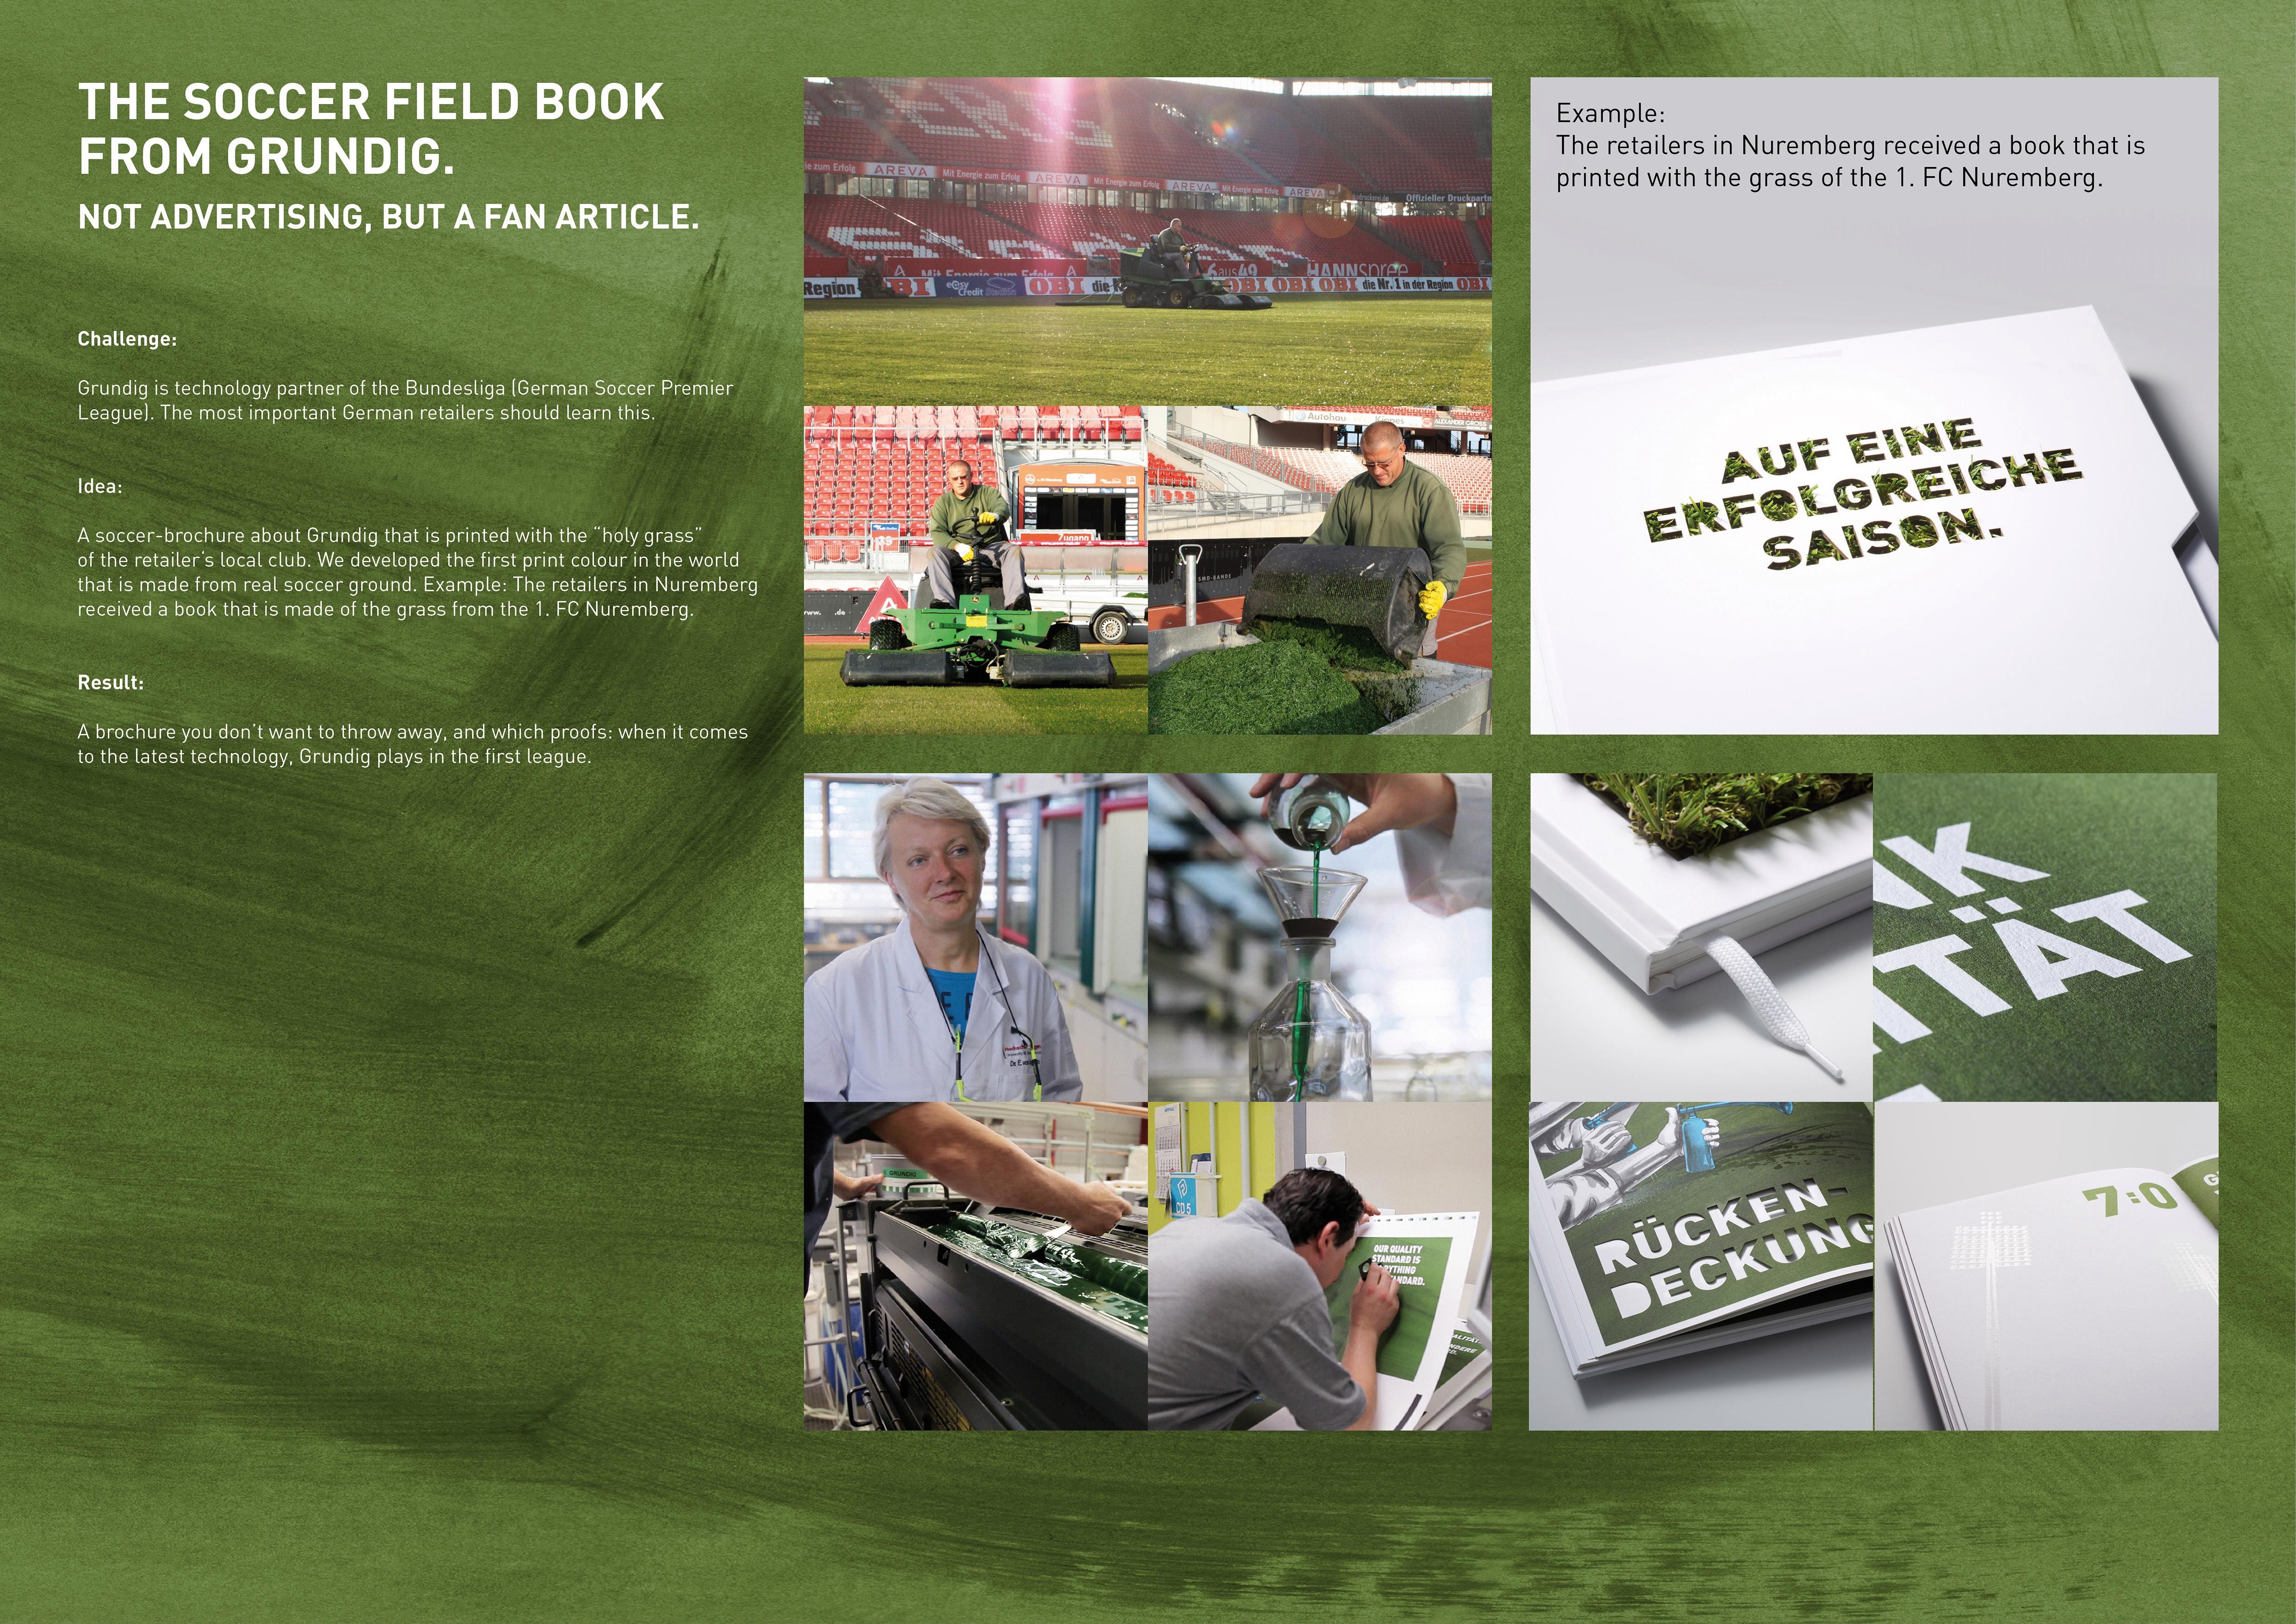 THE SOCCER FIELD BOOK